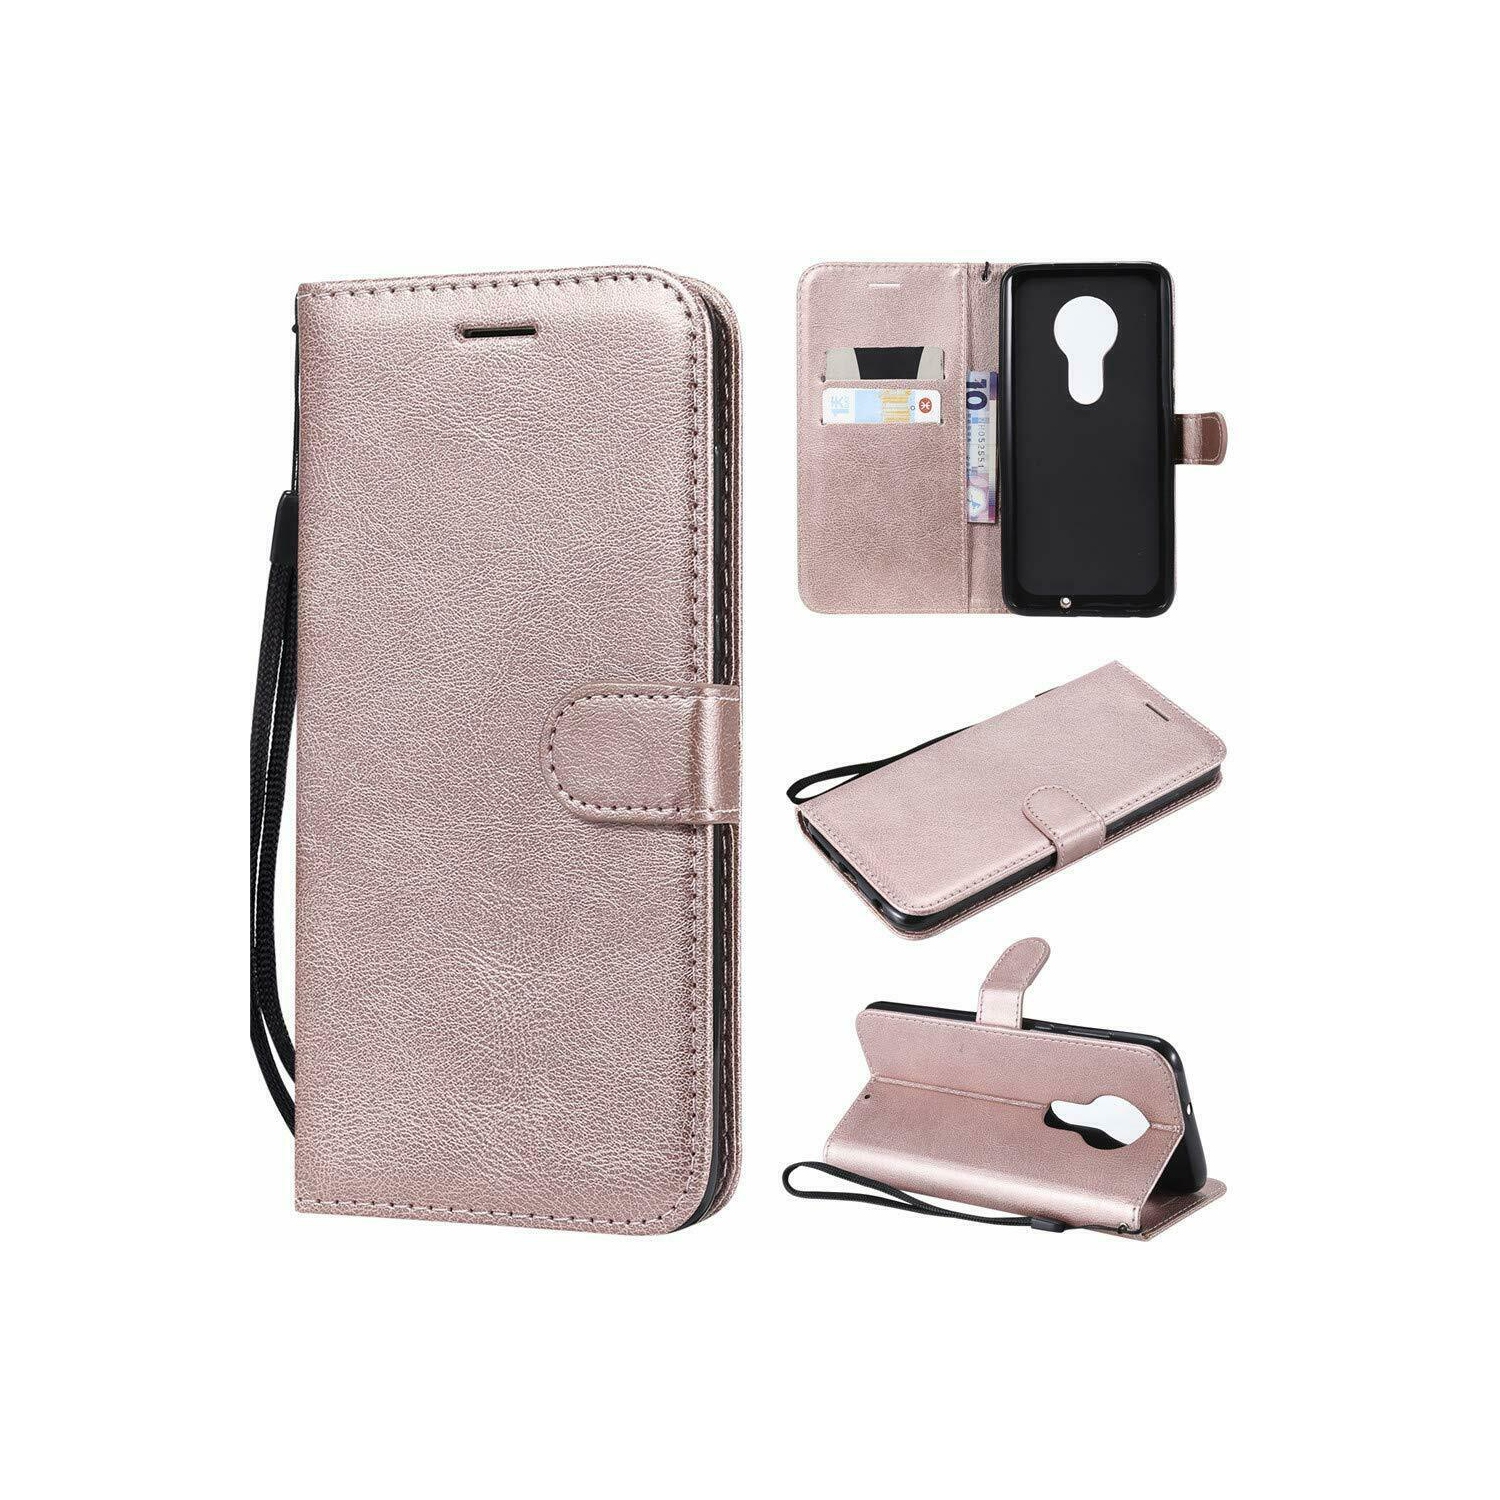 [CS] Motorola Moto G7 Power Case, Magnetic Leather Folio Wallet Flip Case Cover with Card Slot, Rose Gold